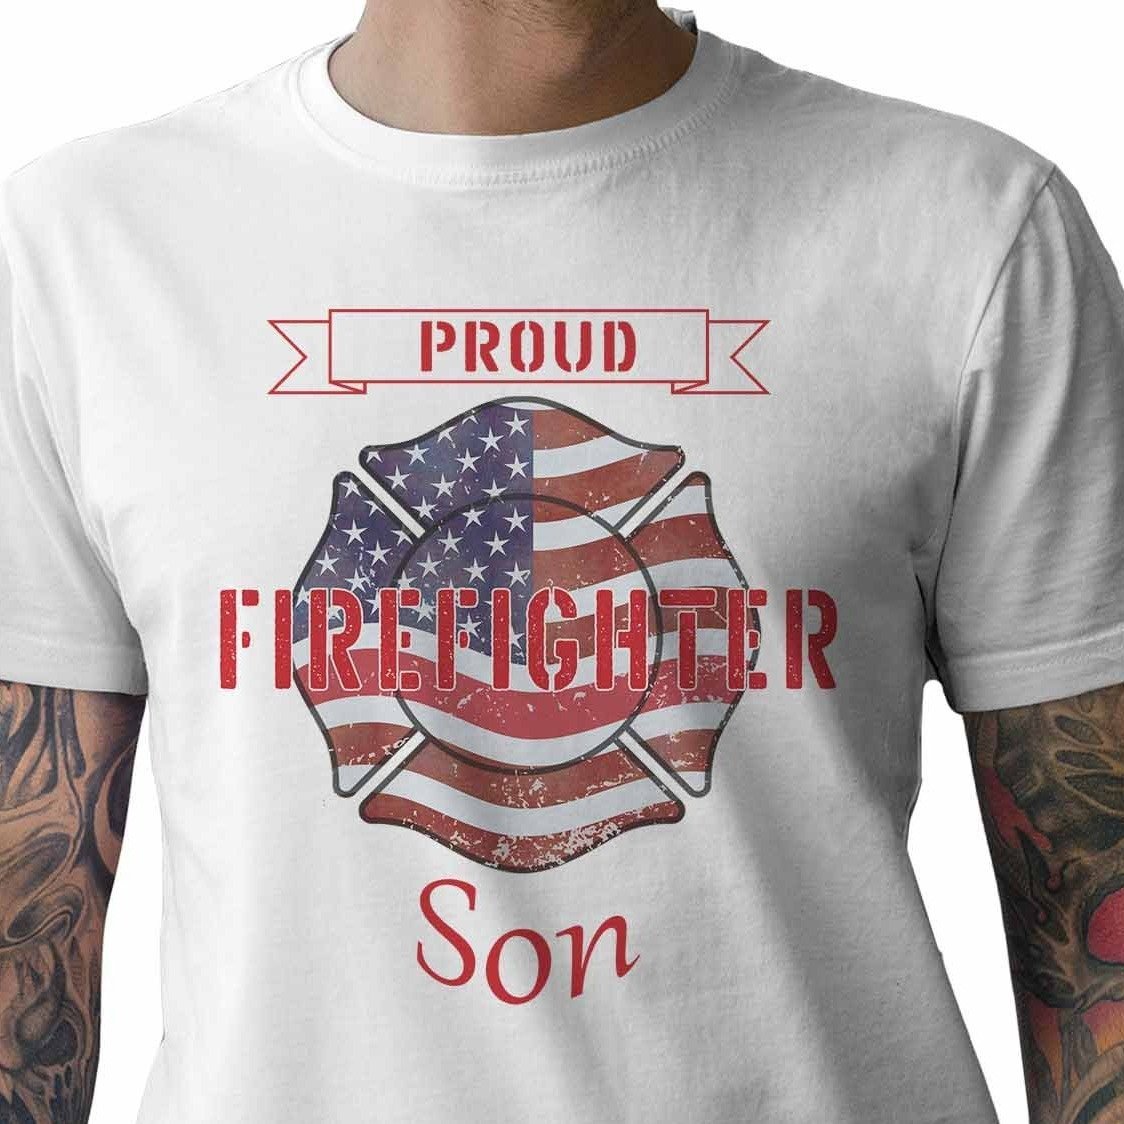 Proud Firefighter Son - My Custom Tee Party